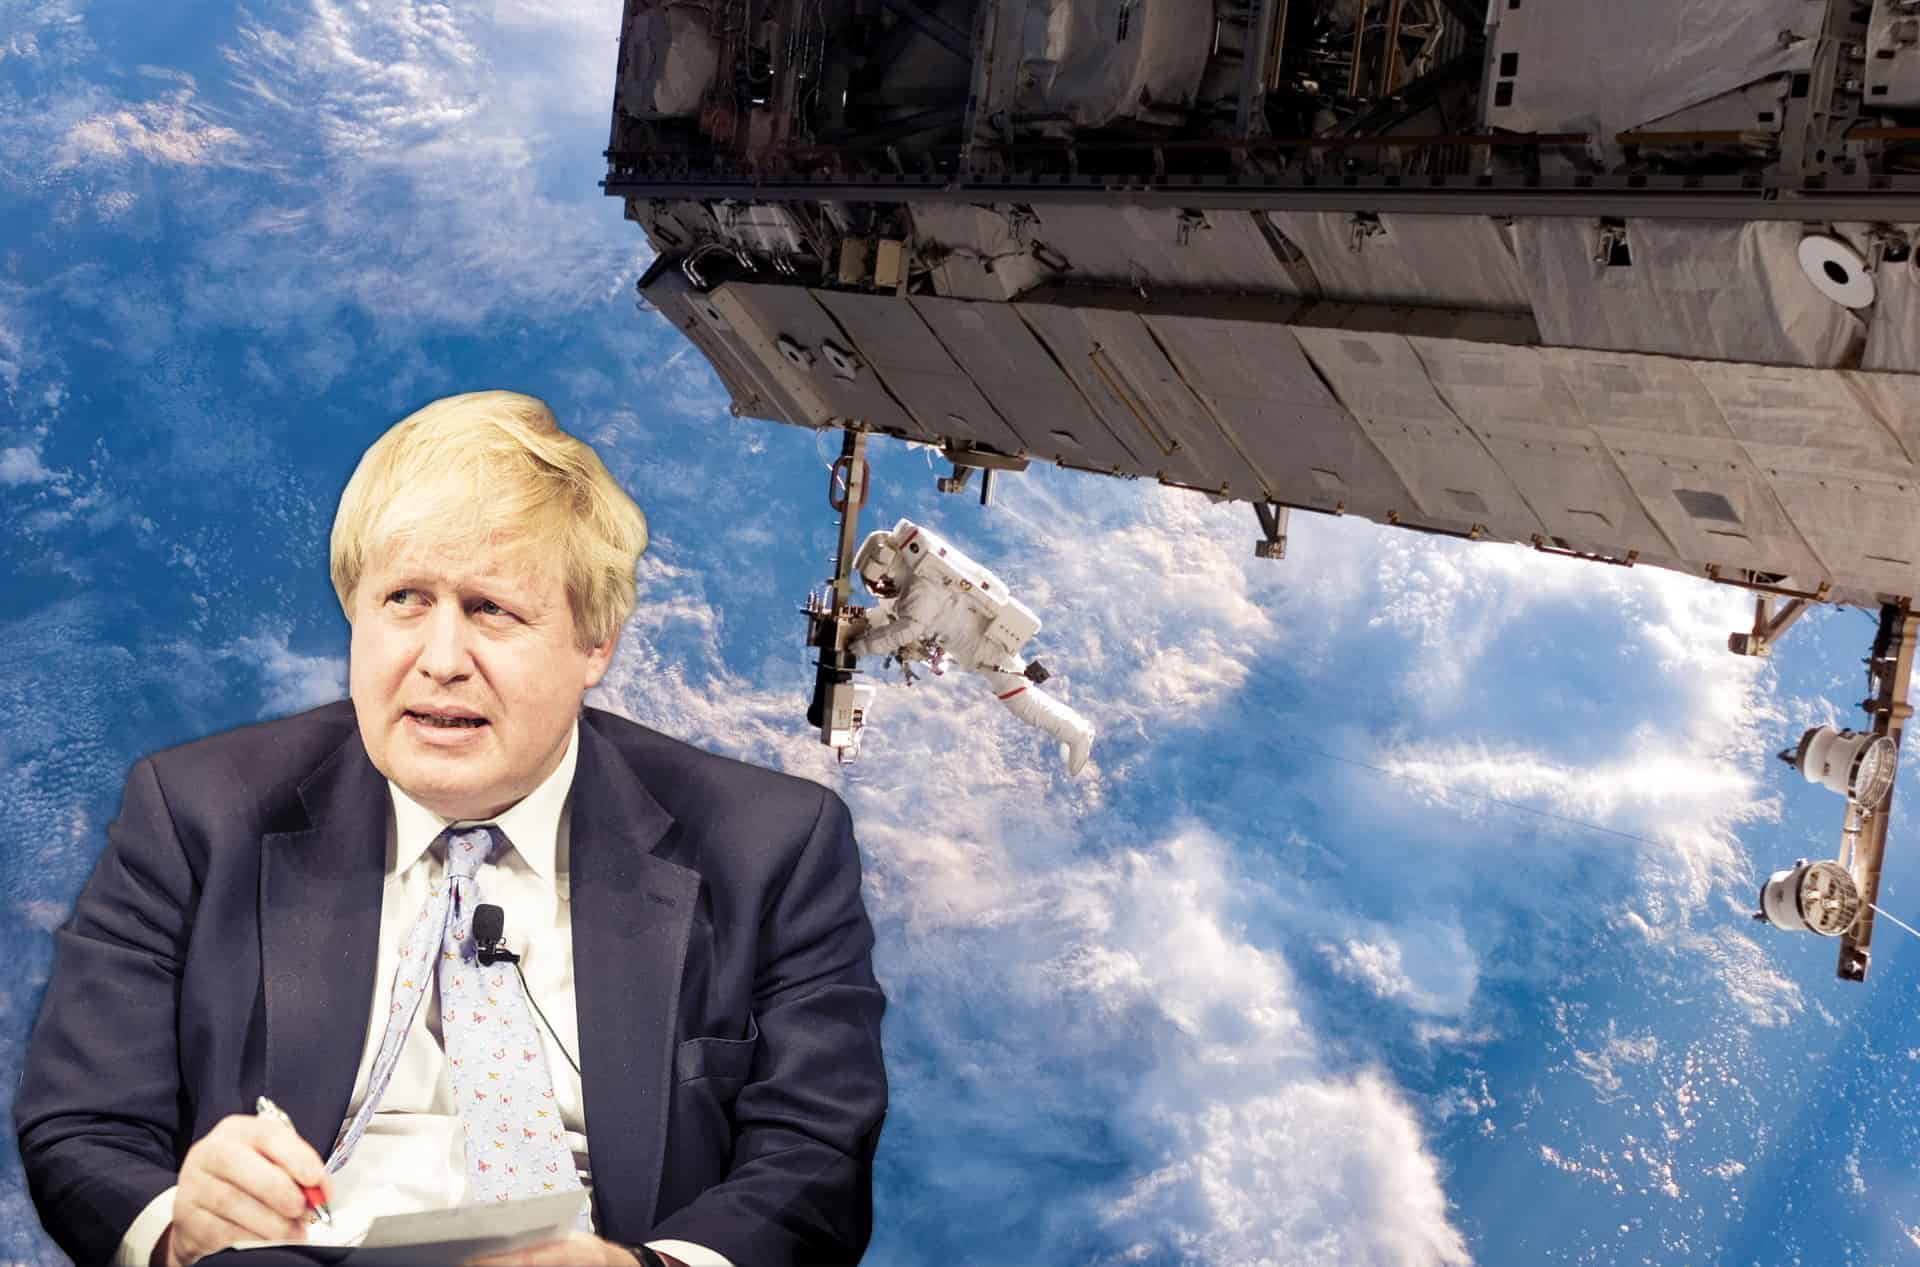 Brexit has now cost more than the International Space Station